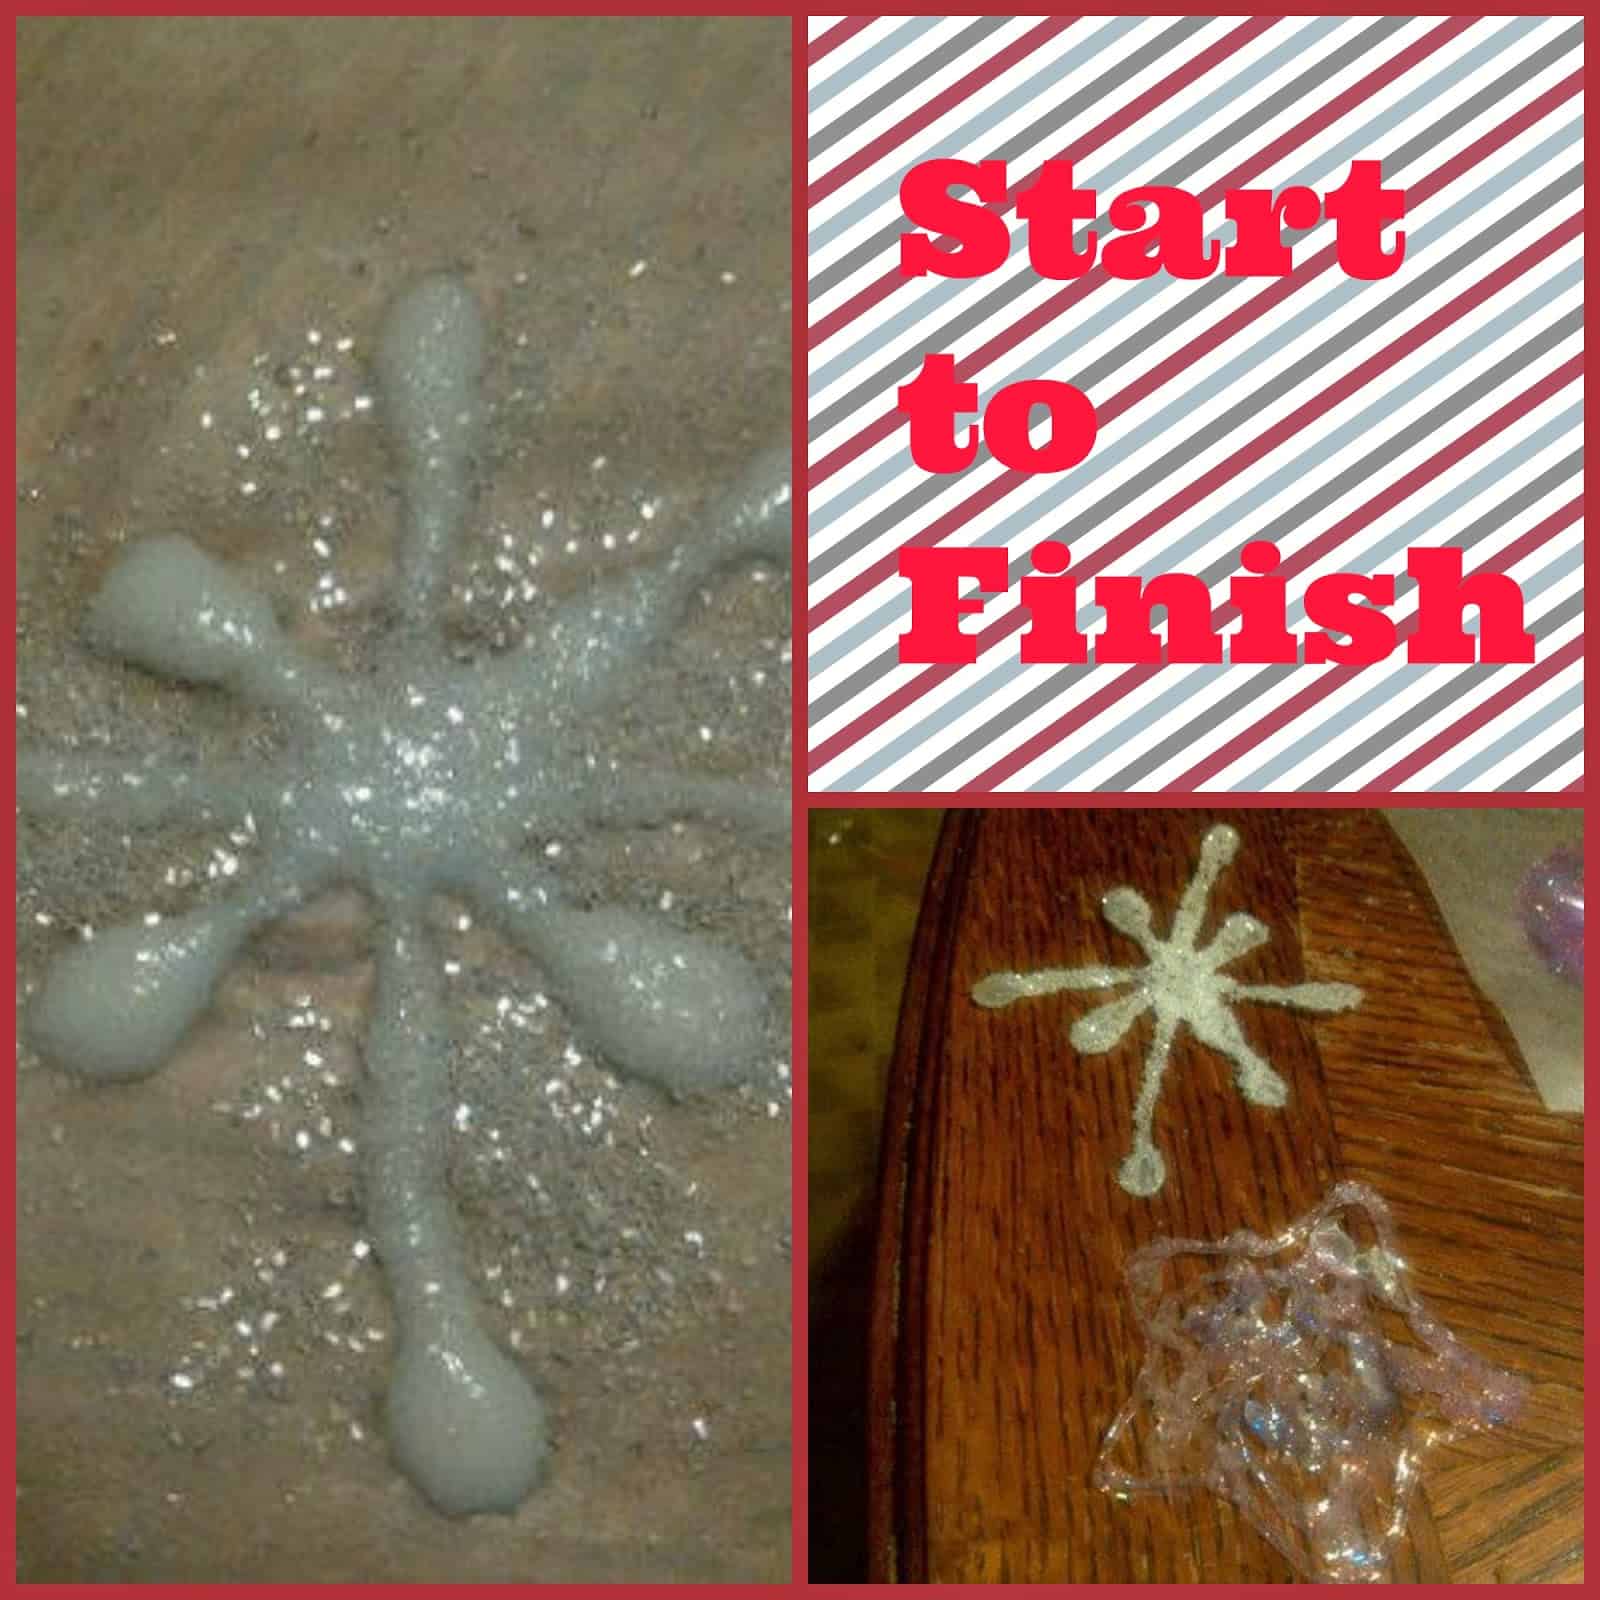 Glue and glitter snowflake crafts 15 pieces of DIY Christmas crafts involving glitter